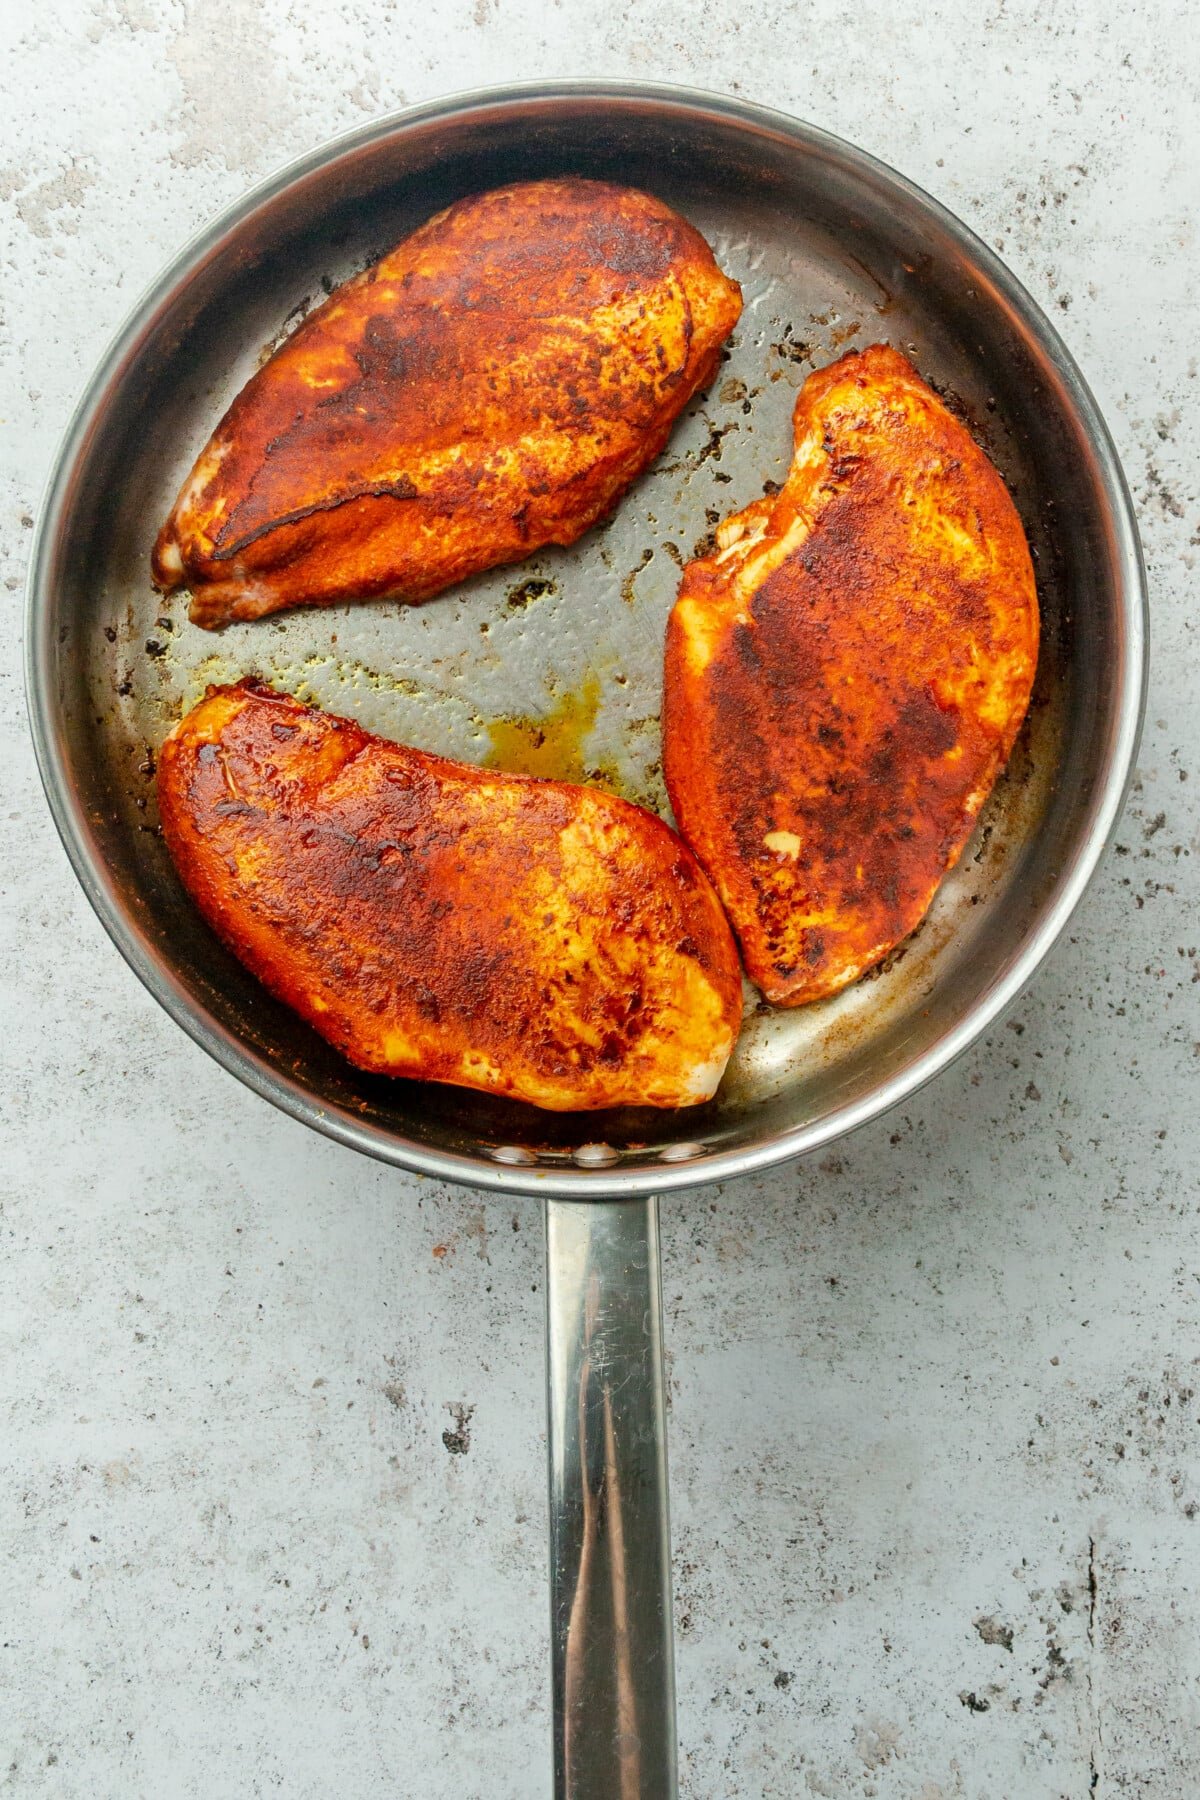 Cooked spiced chicken breasts sit in a stainless steel frying pan on a light grey surface.